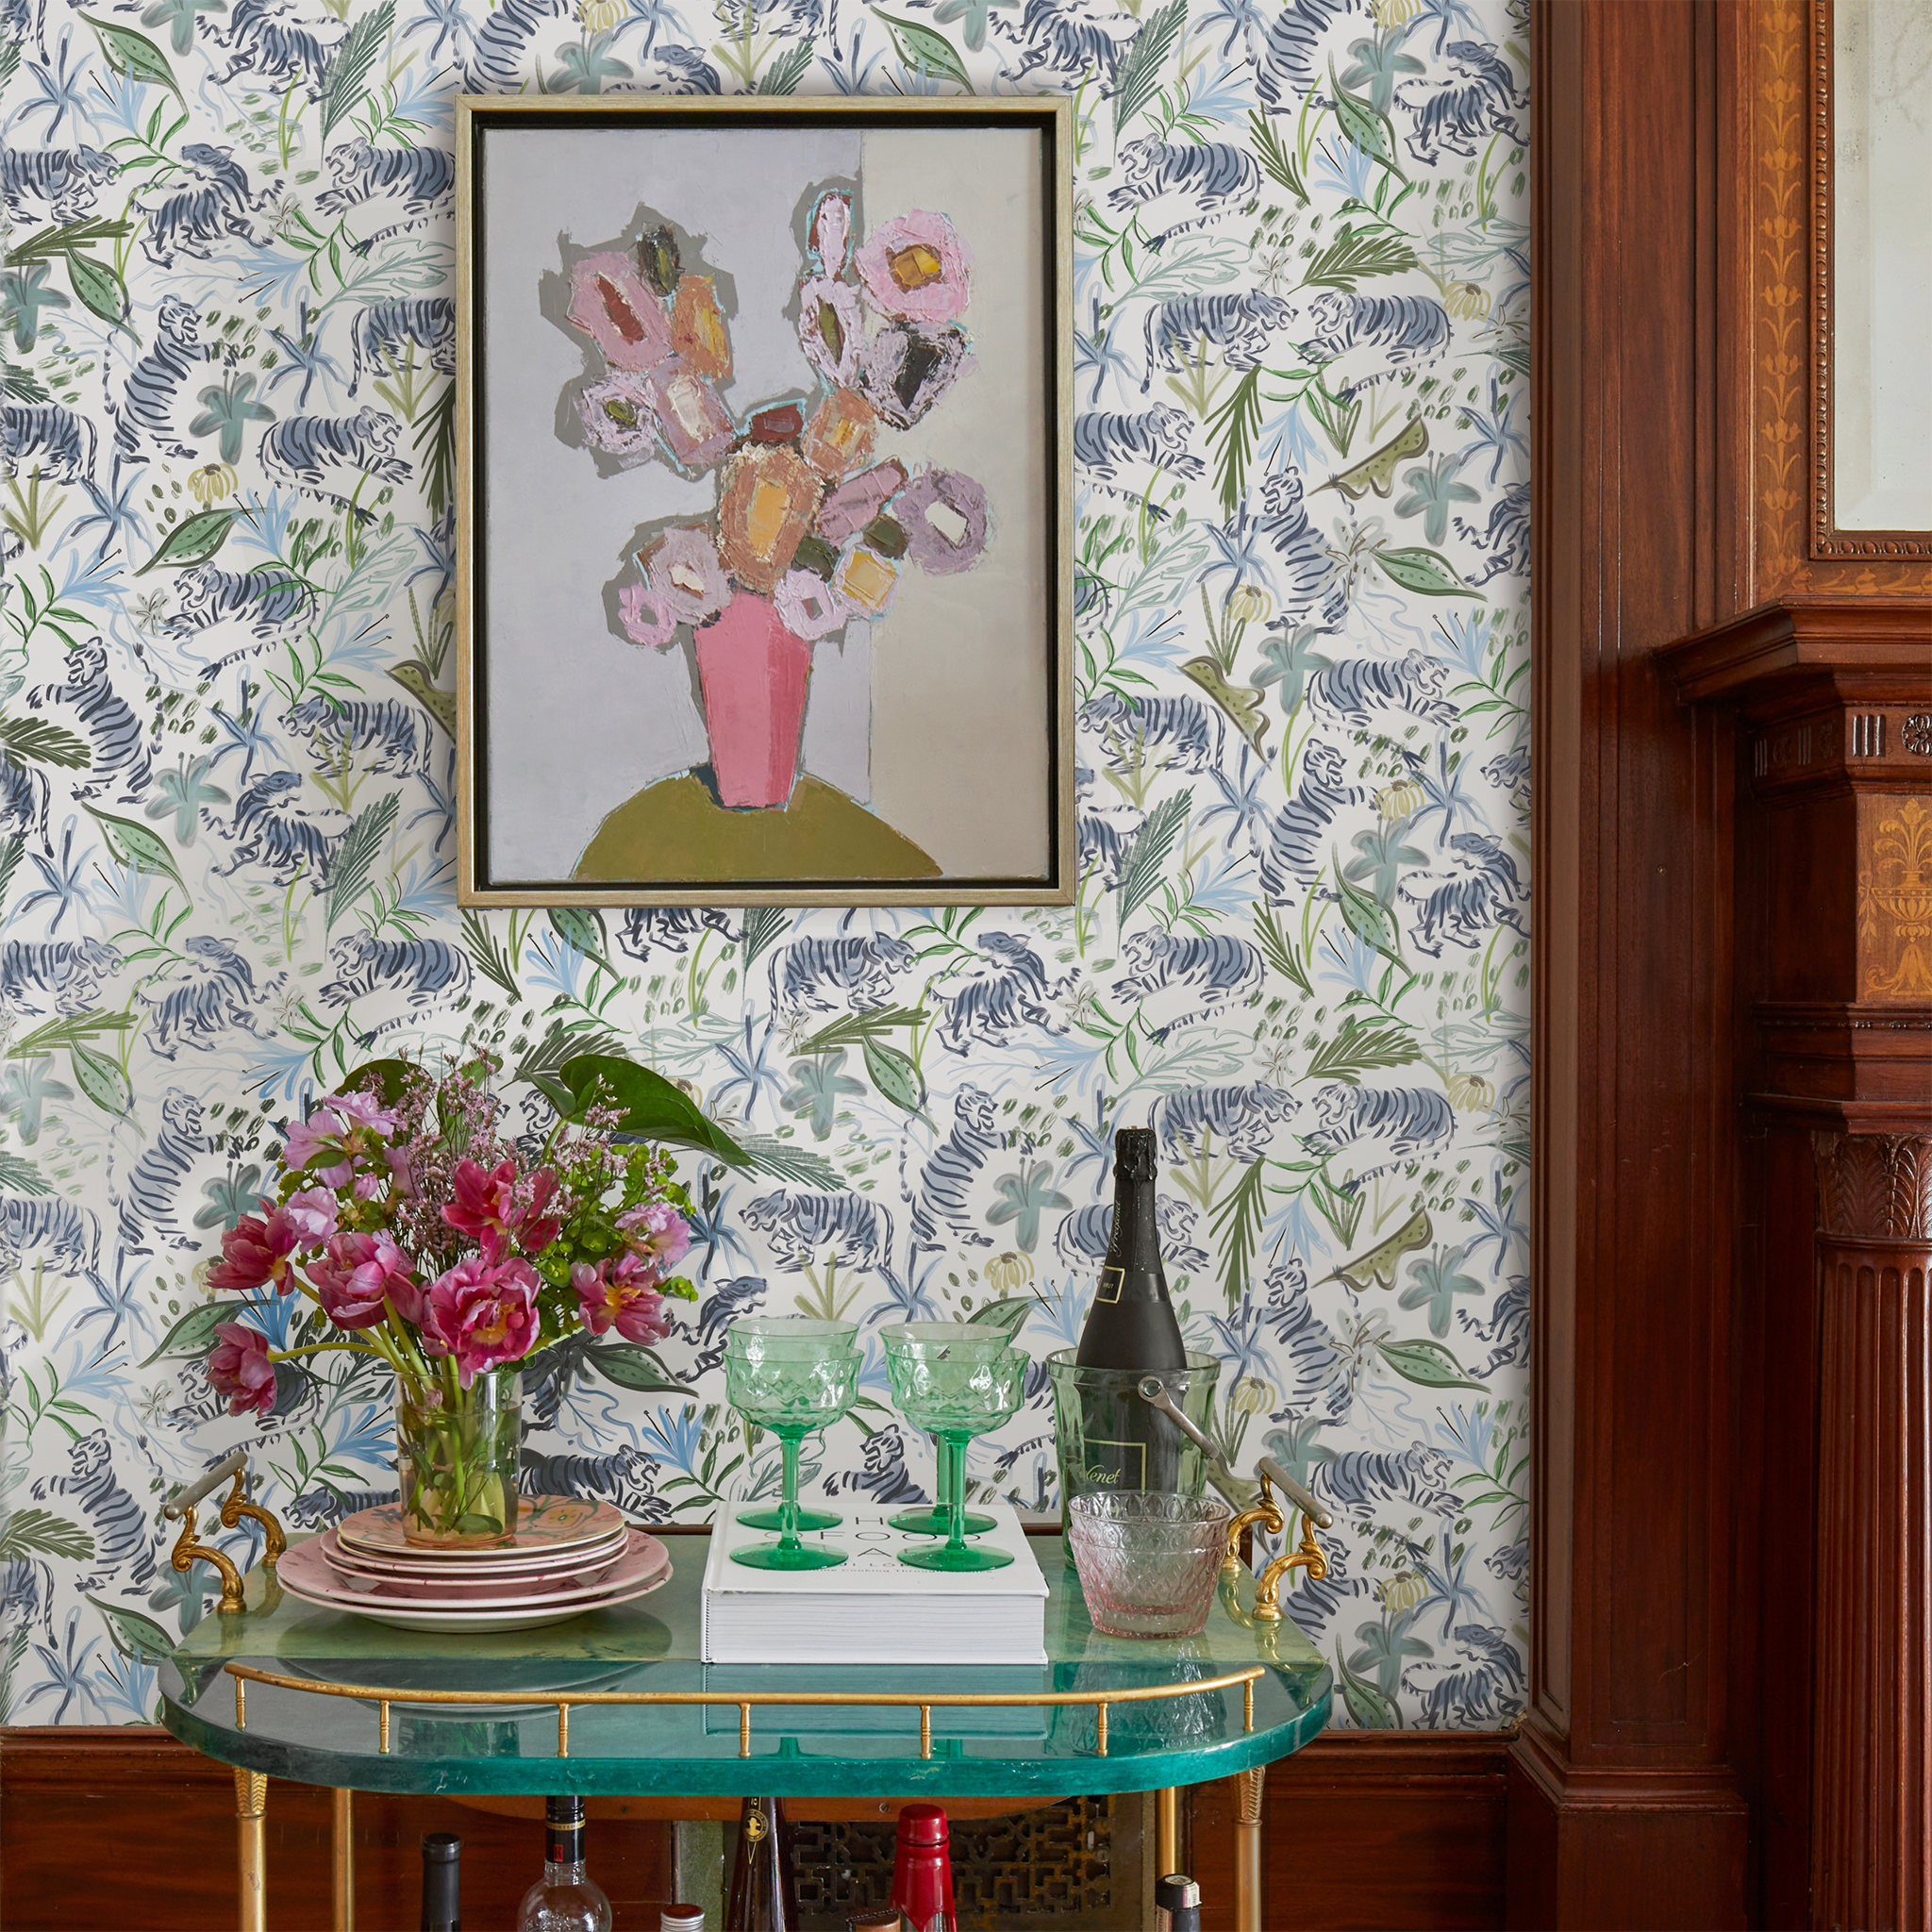 Living room space styled with Green Tiger Printed Wallpaper with artwork hung on top of green bar cart decorated with pink flowers in transparent vase on top of pink stacked plates next to green glasses